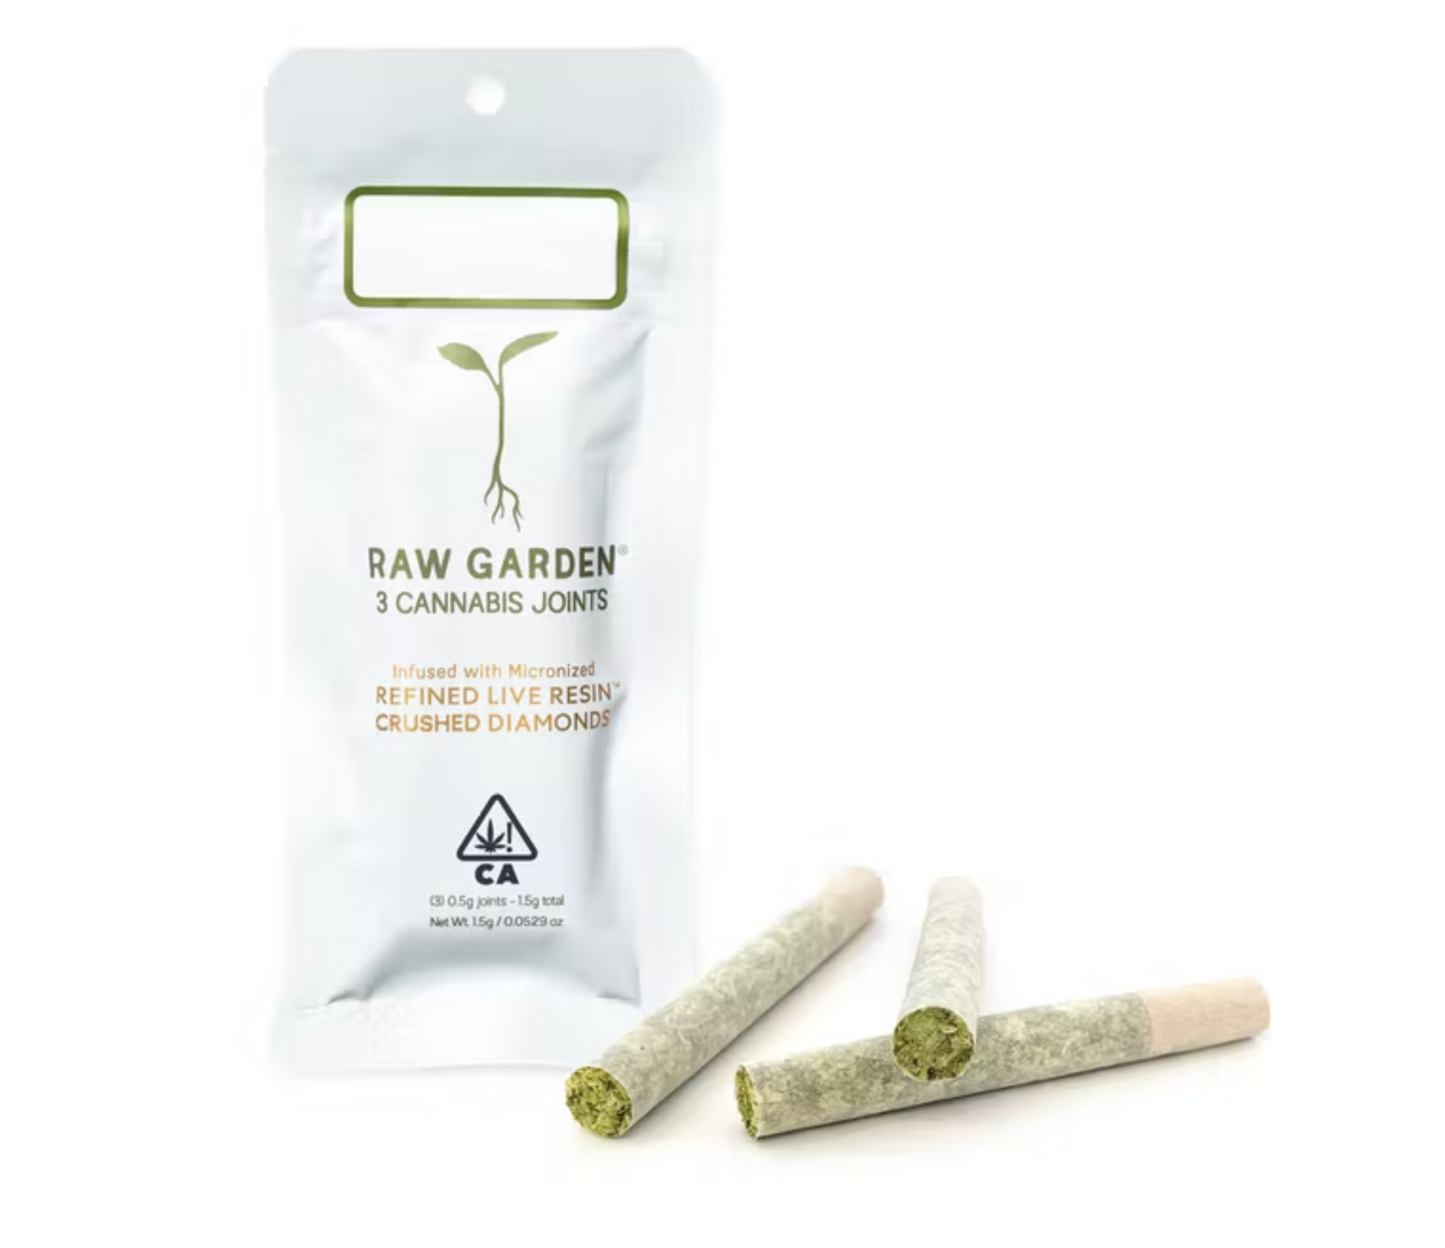 Raw Garden Pre Roll Packs (Tax Included - Verified)